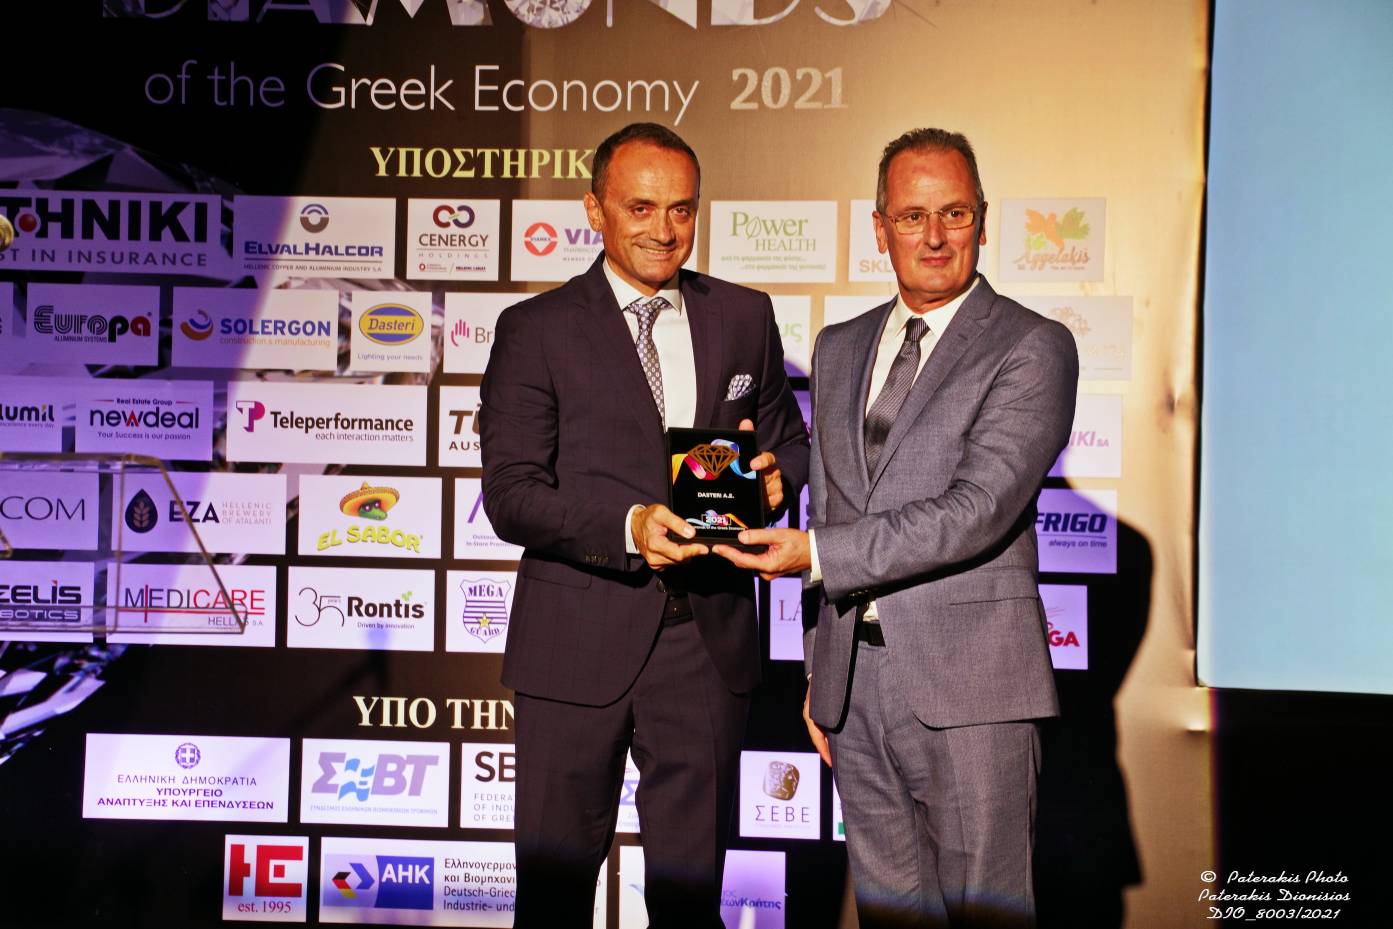 DASTERI receives the “Diamond of the Greek Economy” award for the third consecutive year